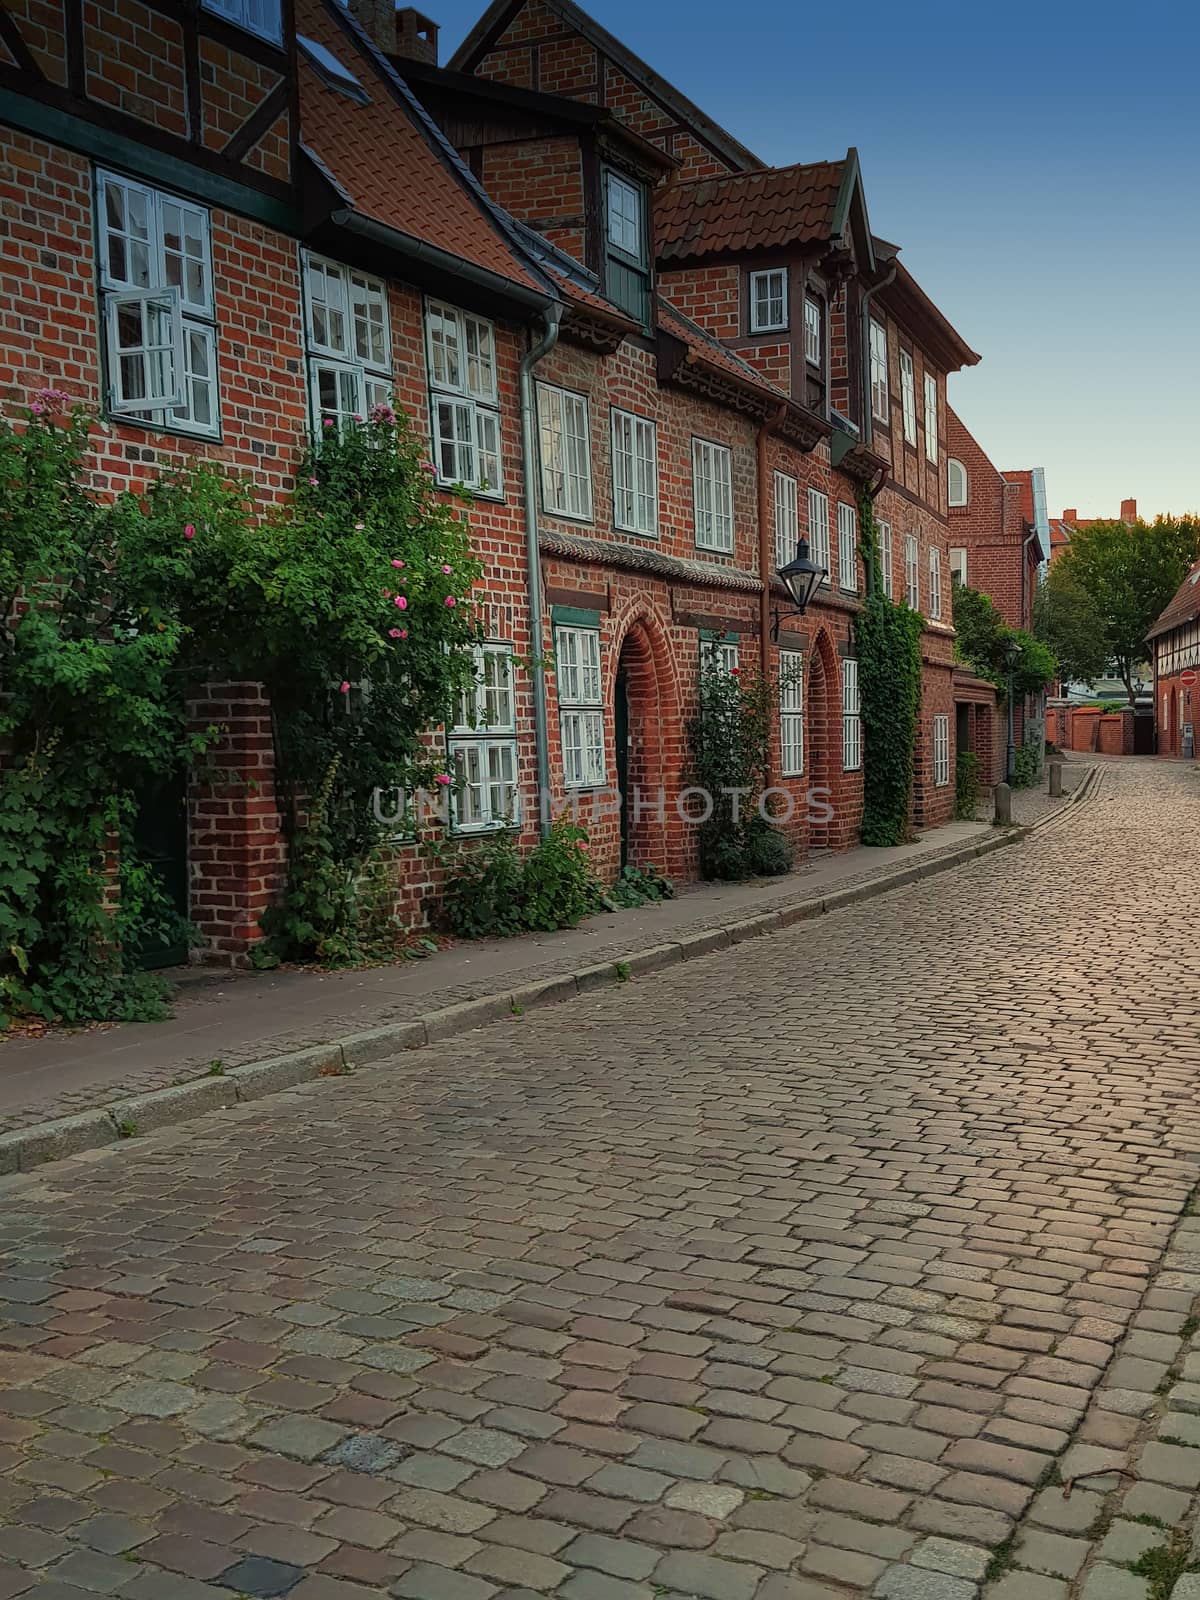 Half-timbered red brick houses in Lueneburg      by JFsPic